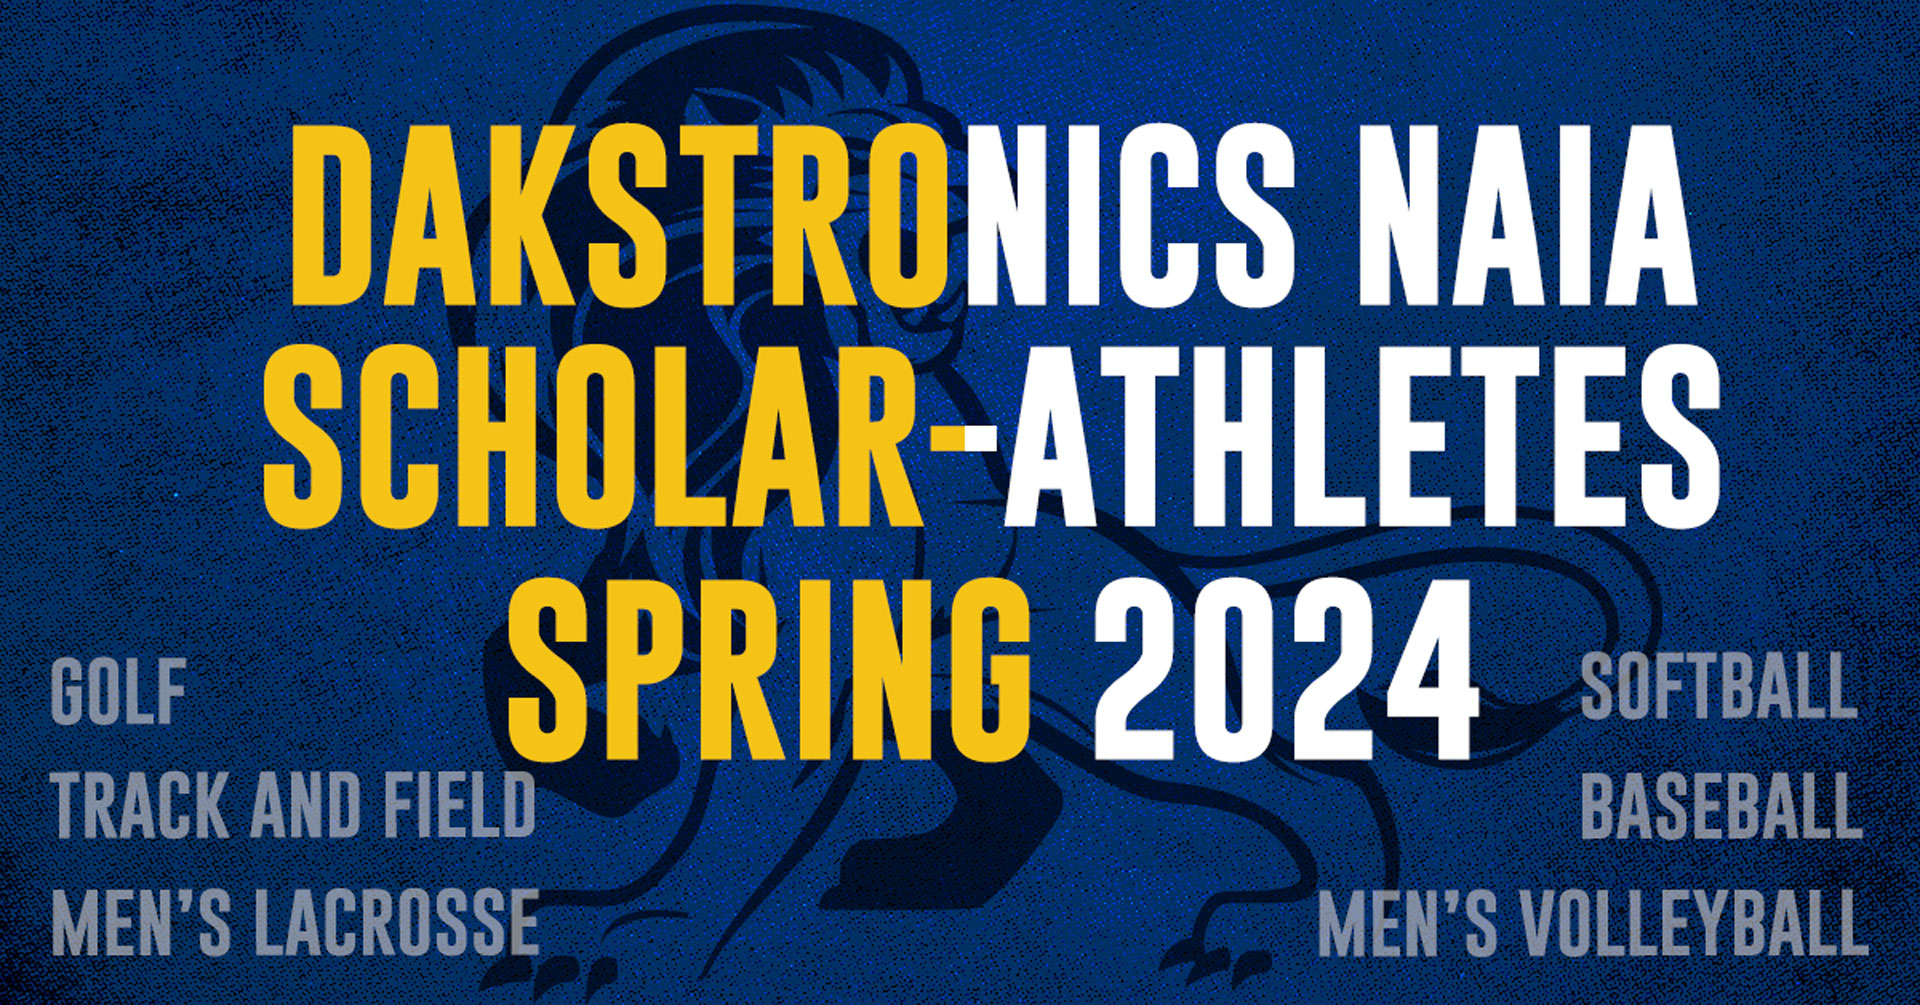 NAIA Scholar-Athletes complete for 2023-24 with Spring 2024 recipients honored